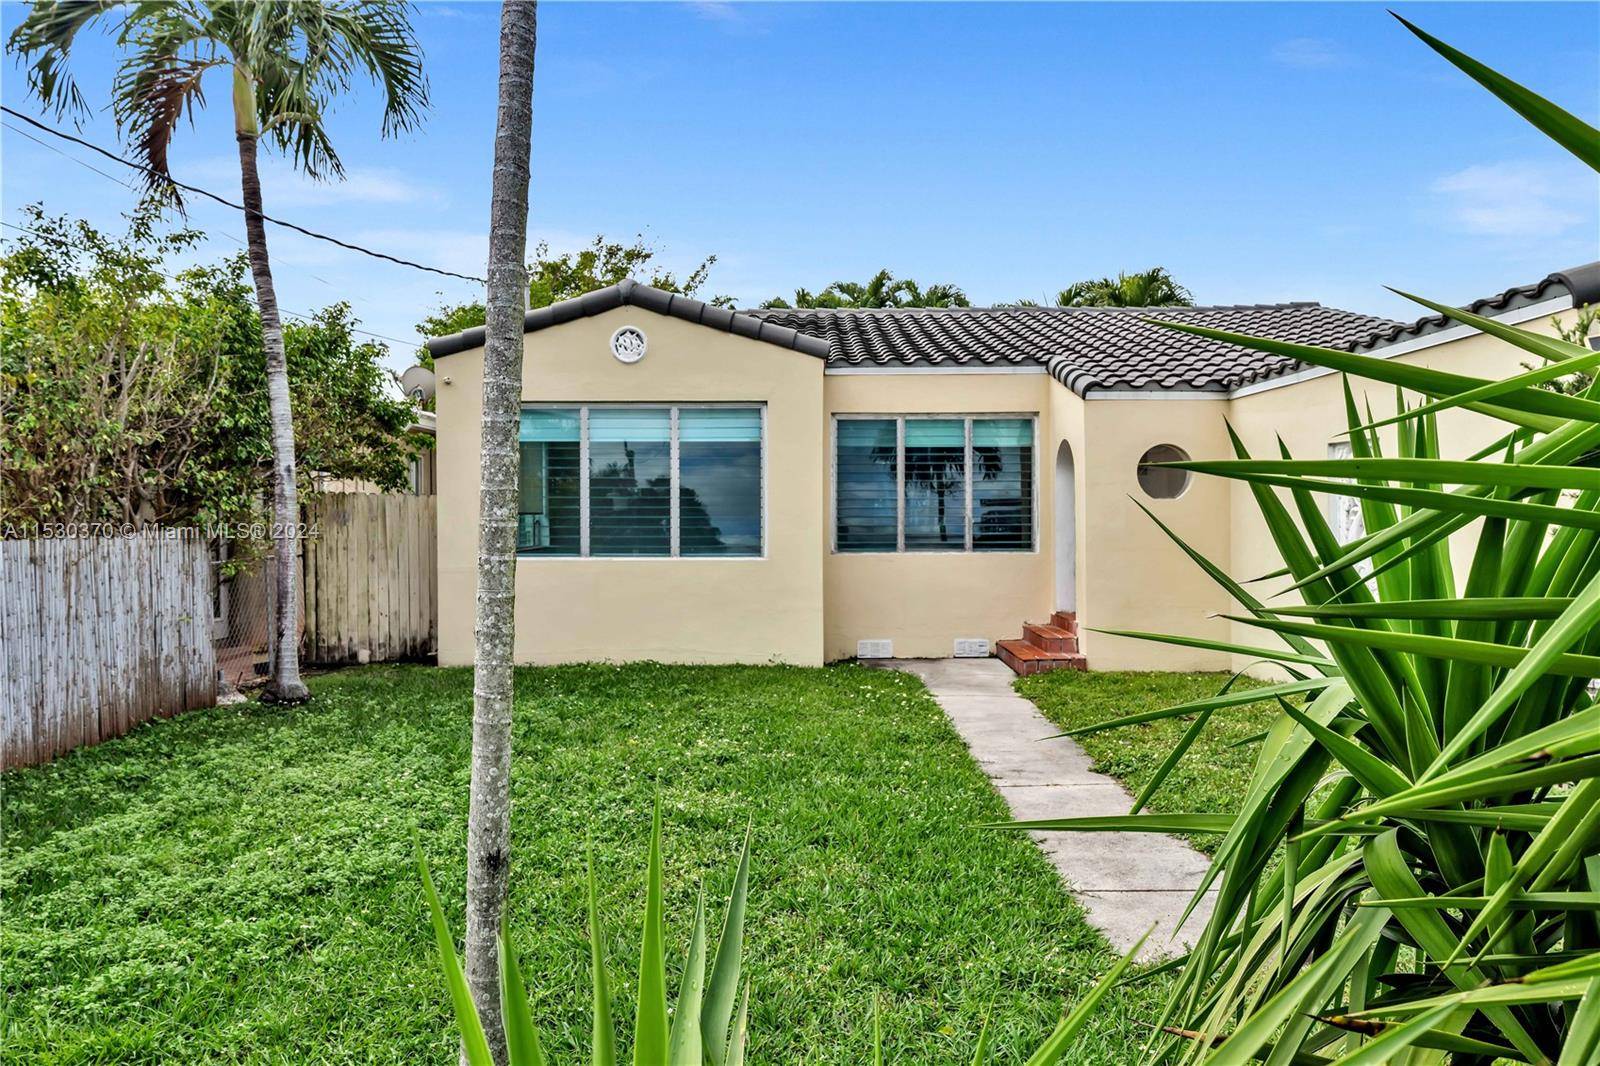 This delightful home is situated in the heart of Surfside, boasting three bedrooms plus a den and two bathrooms, all adorned with original wood floors.